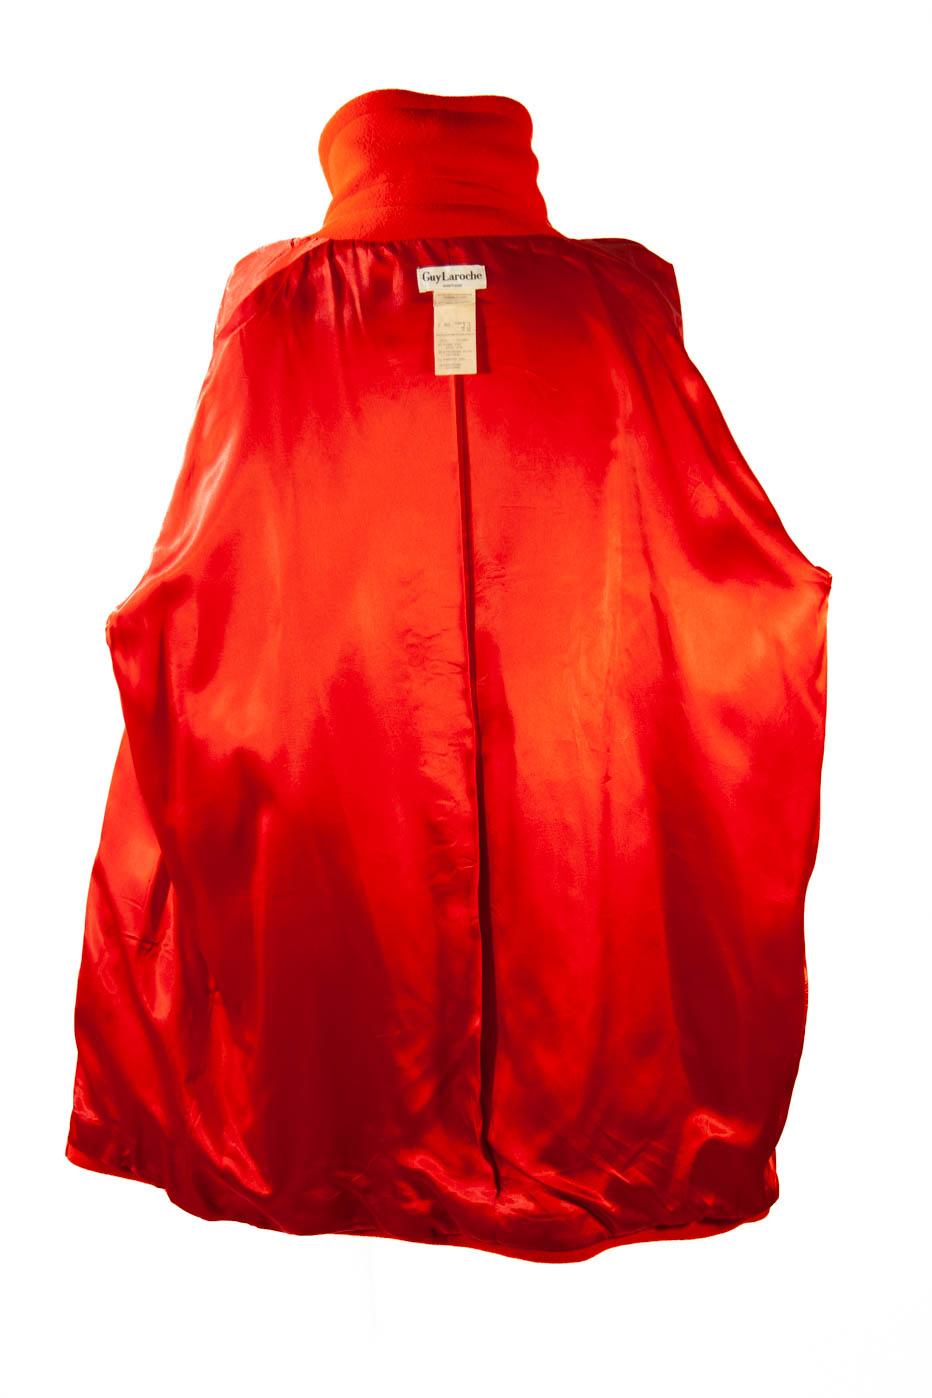 Guy Laroche Boutique, Wool and Cashmere, Vermilion, Oversized Coat, 1980s 2